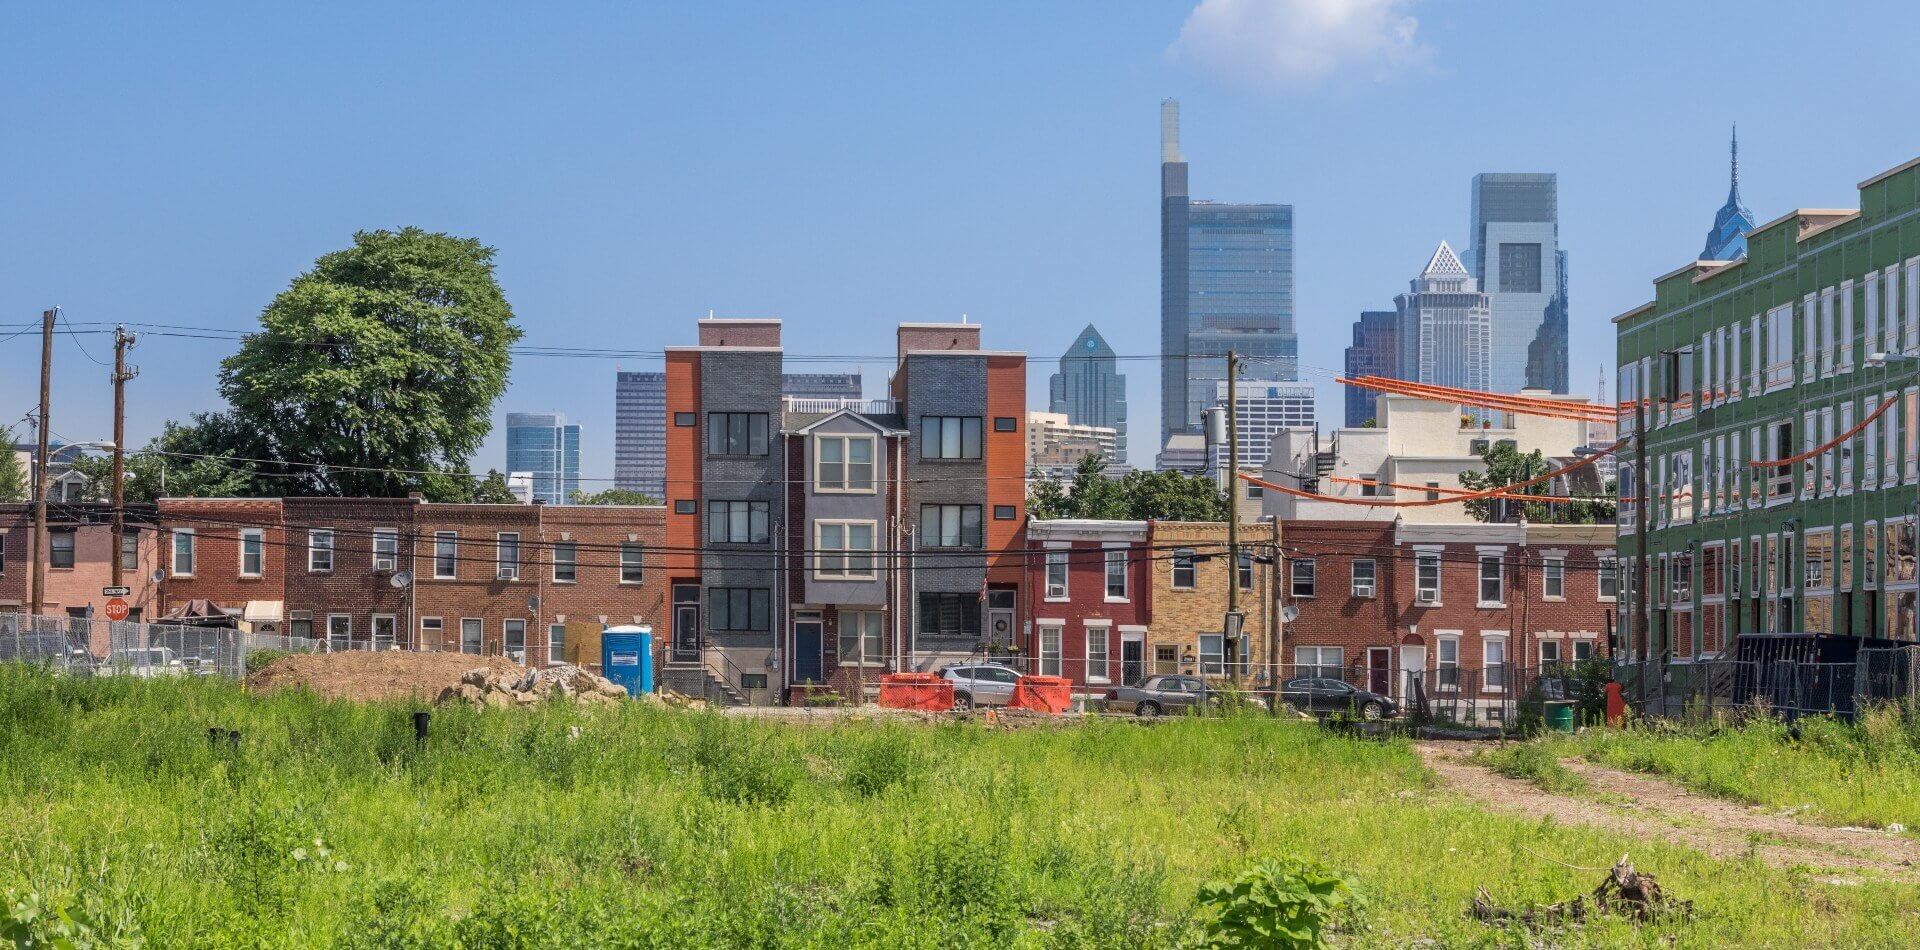 South Philly Neighborhoods: Popular Areas and Emerging Development